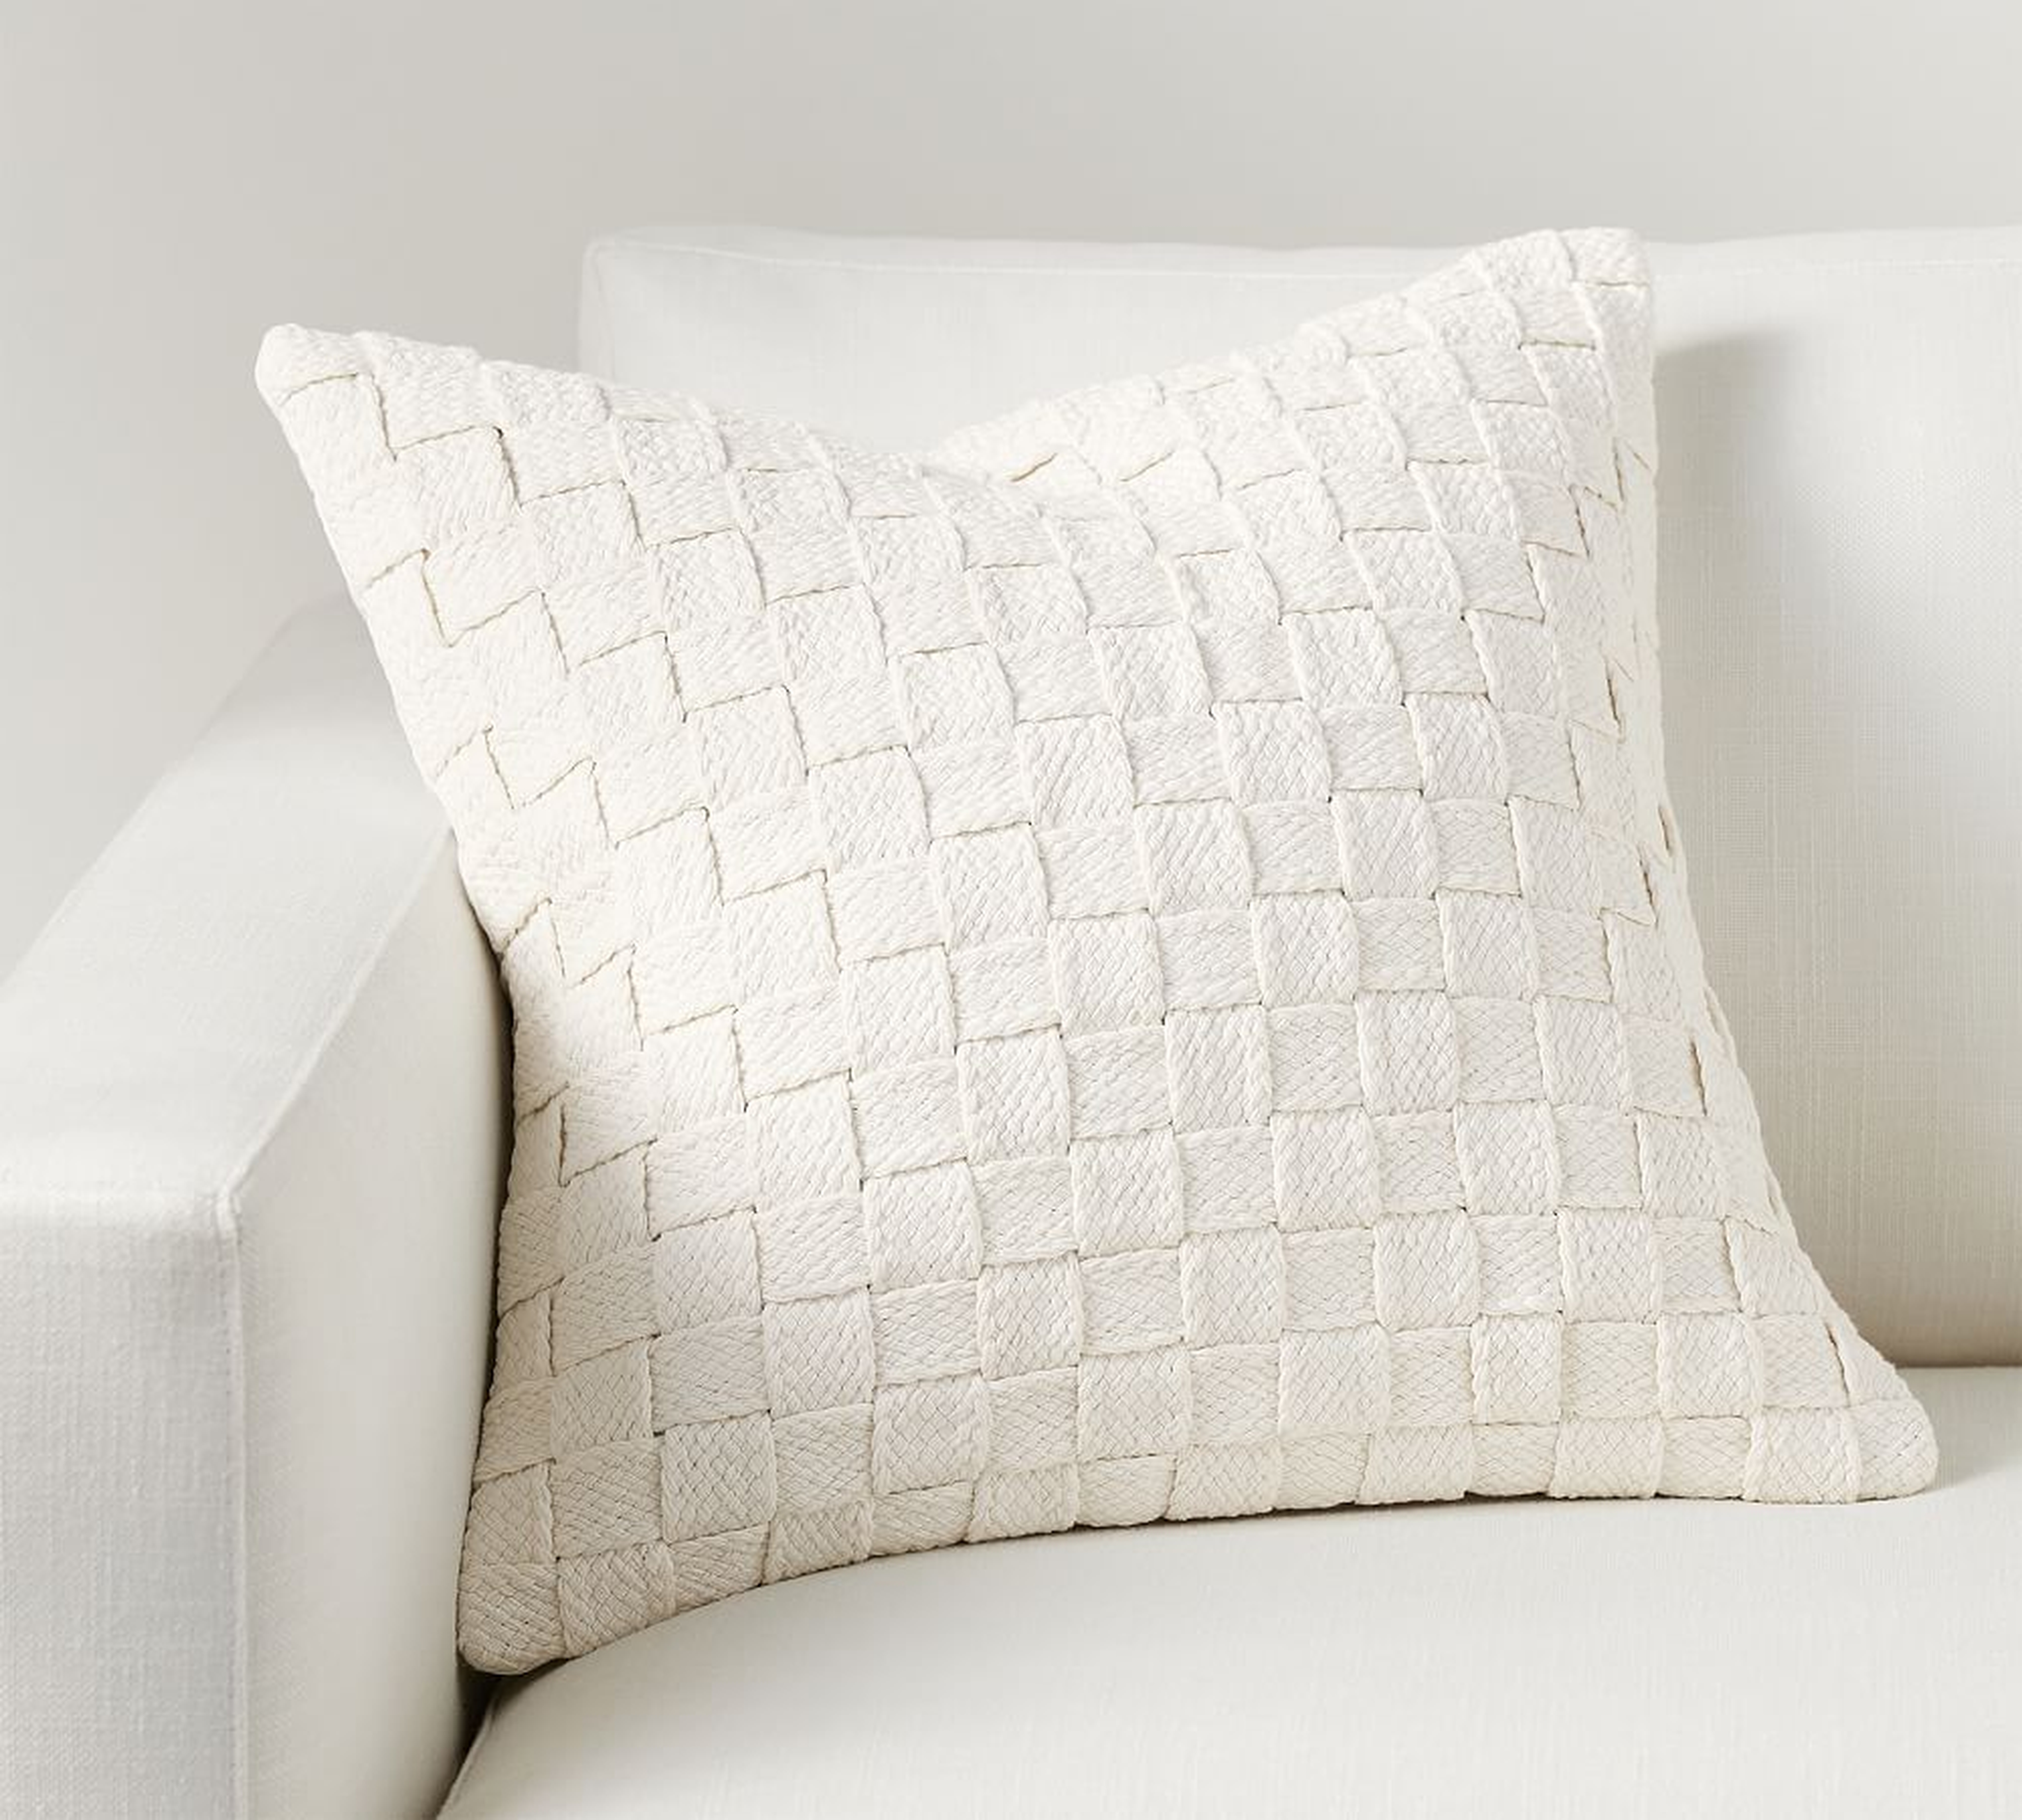 Basketweave Pillow Cover, 20" x 20", White - Pottery Barn